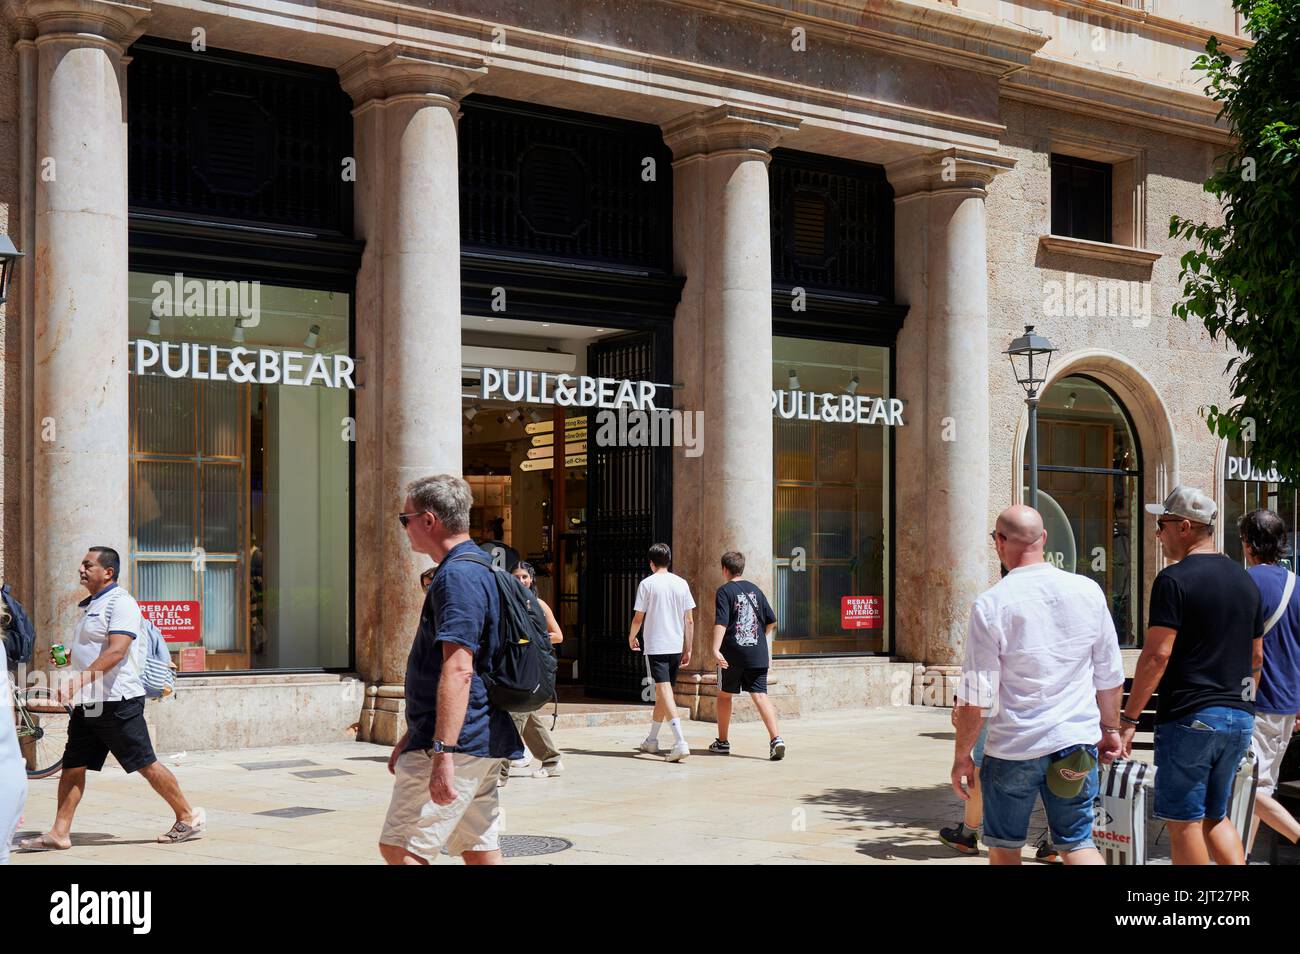 People in front of Pull and Bear store in Palma de Majorca, Spain Stock Photo